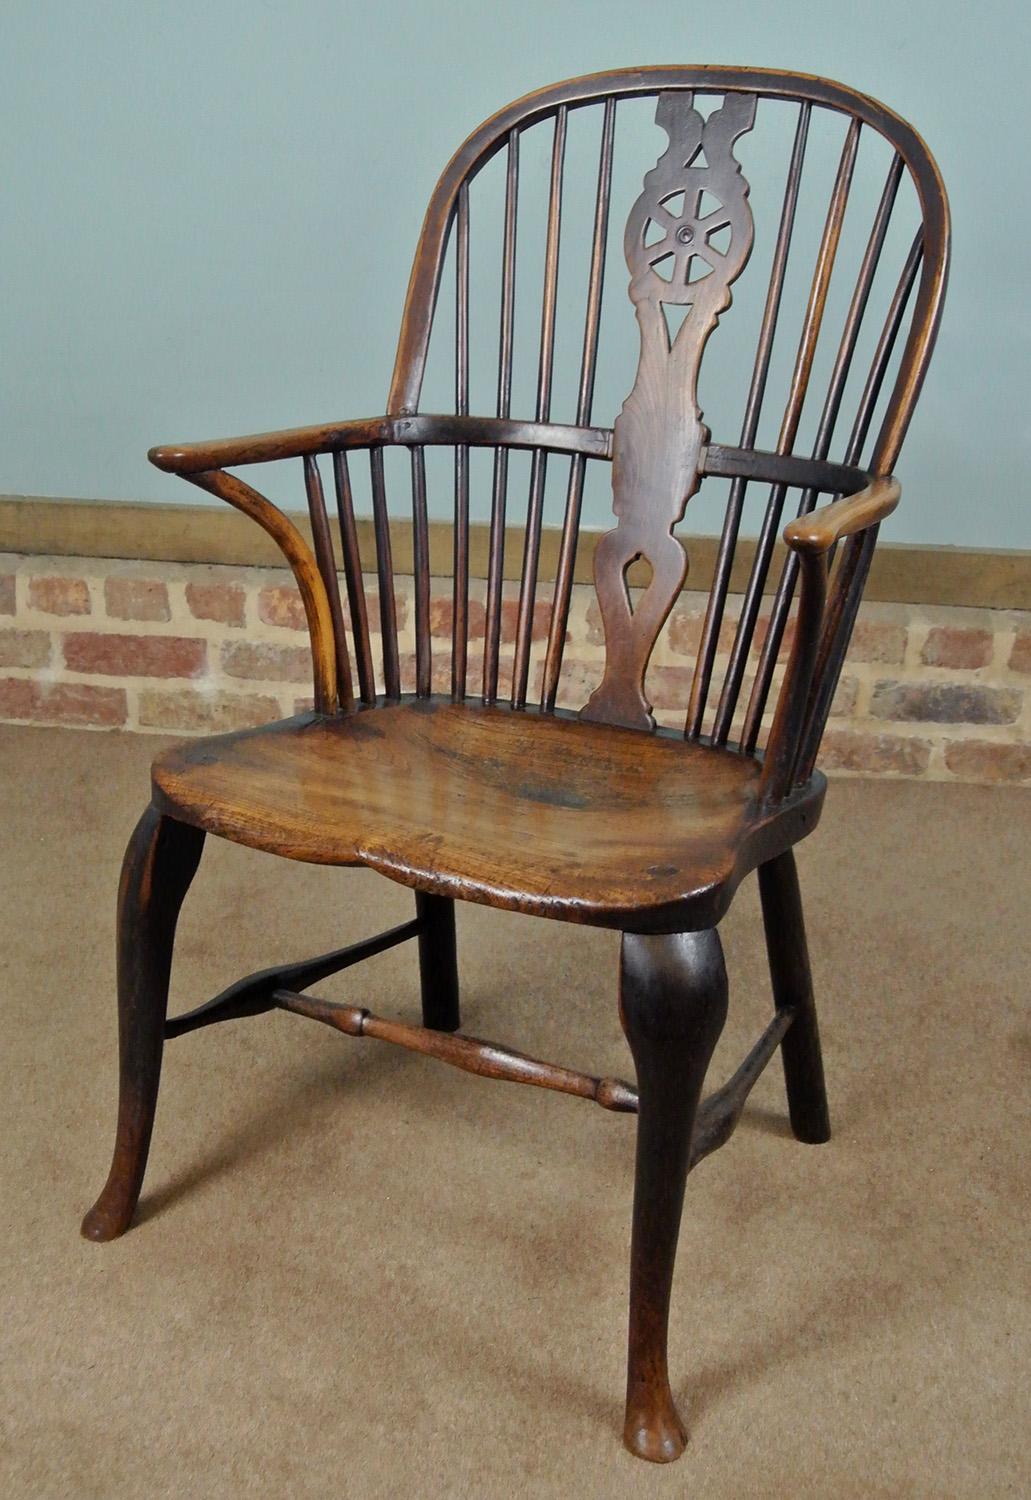 Ash Good 18th Century Windsor Wheel Back Chair with Cabriole Front Legs, C. 1780